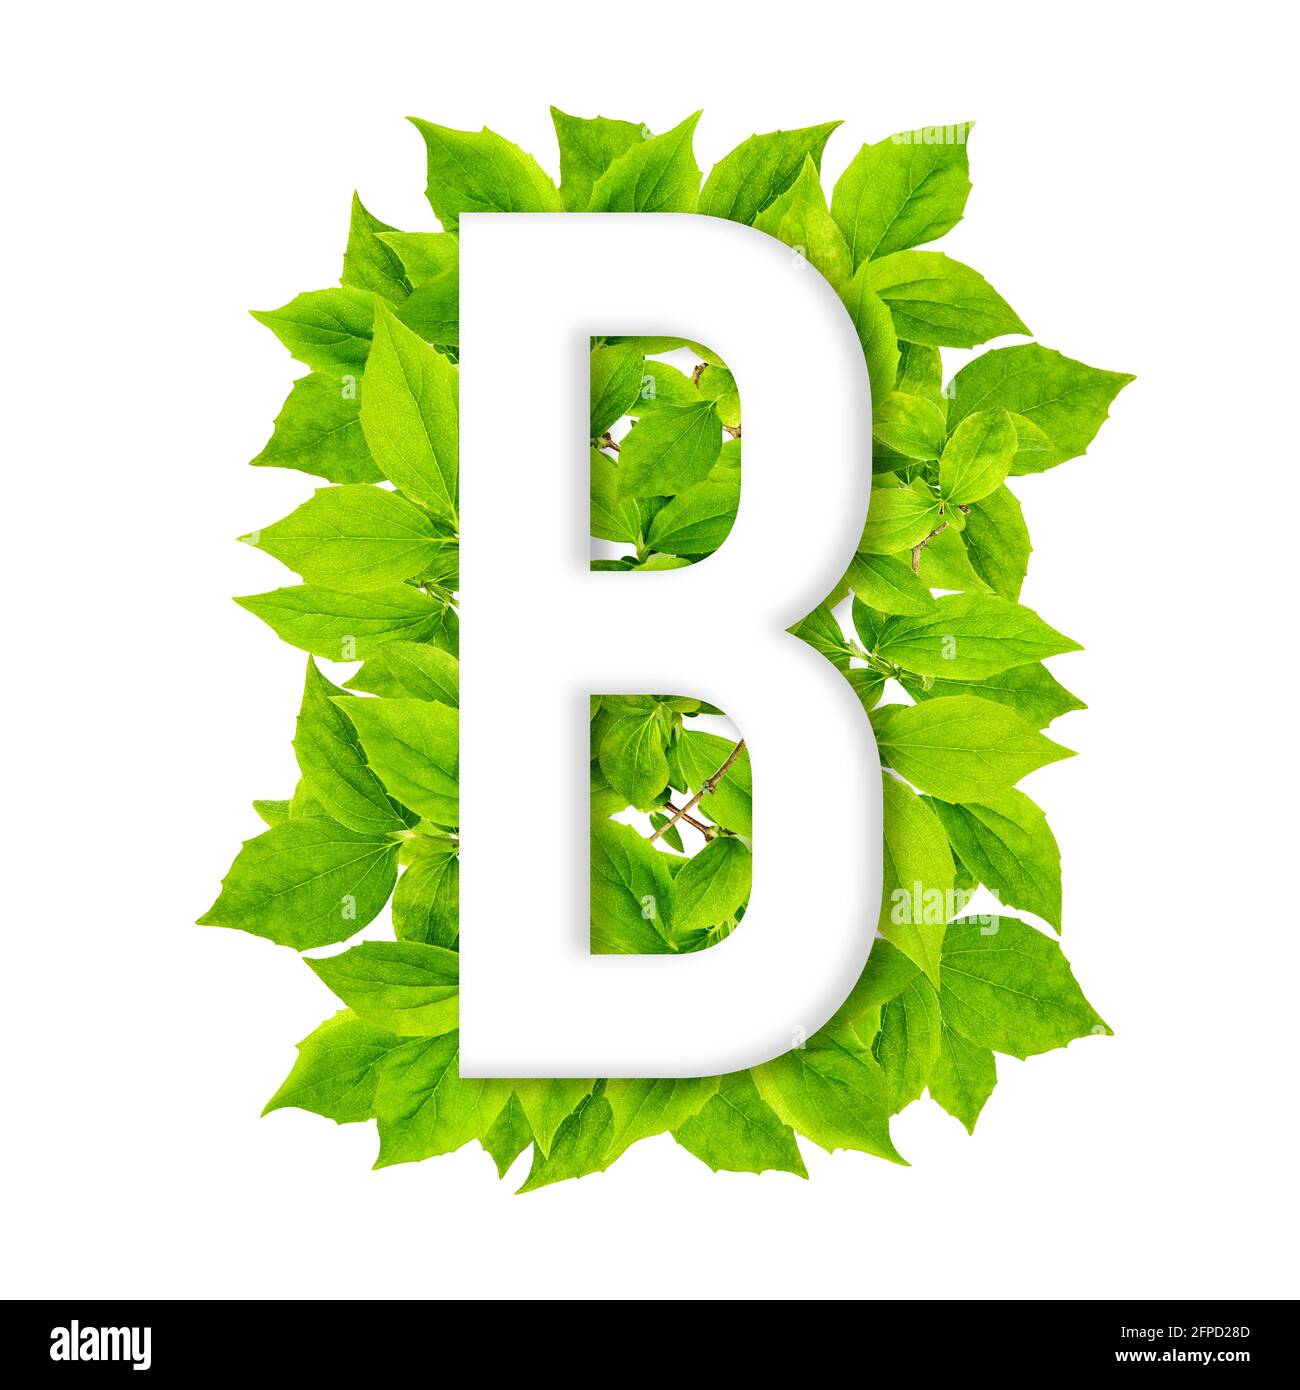 https://c8.alamy.com/comp/2FPD28D/letter-b-with-green-leaves-background-abc-floral-alphabet-2FPD28D.jpg